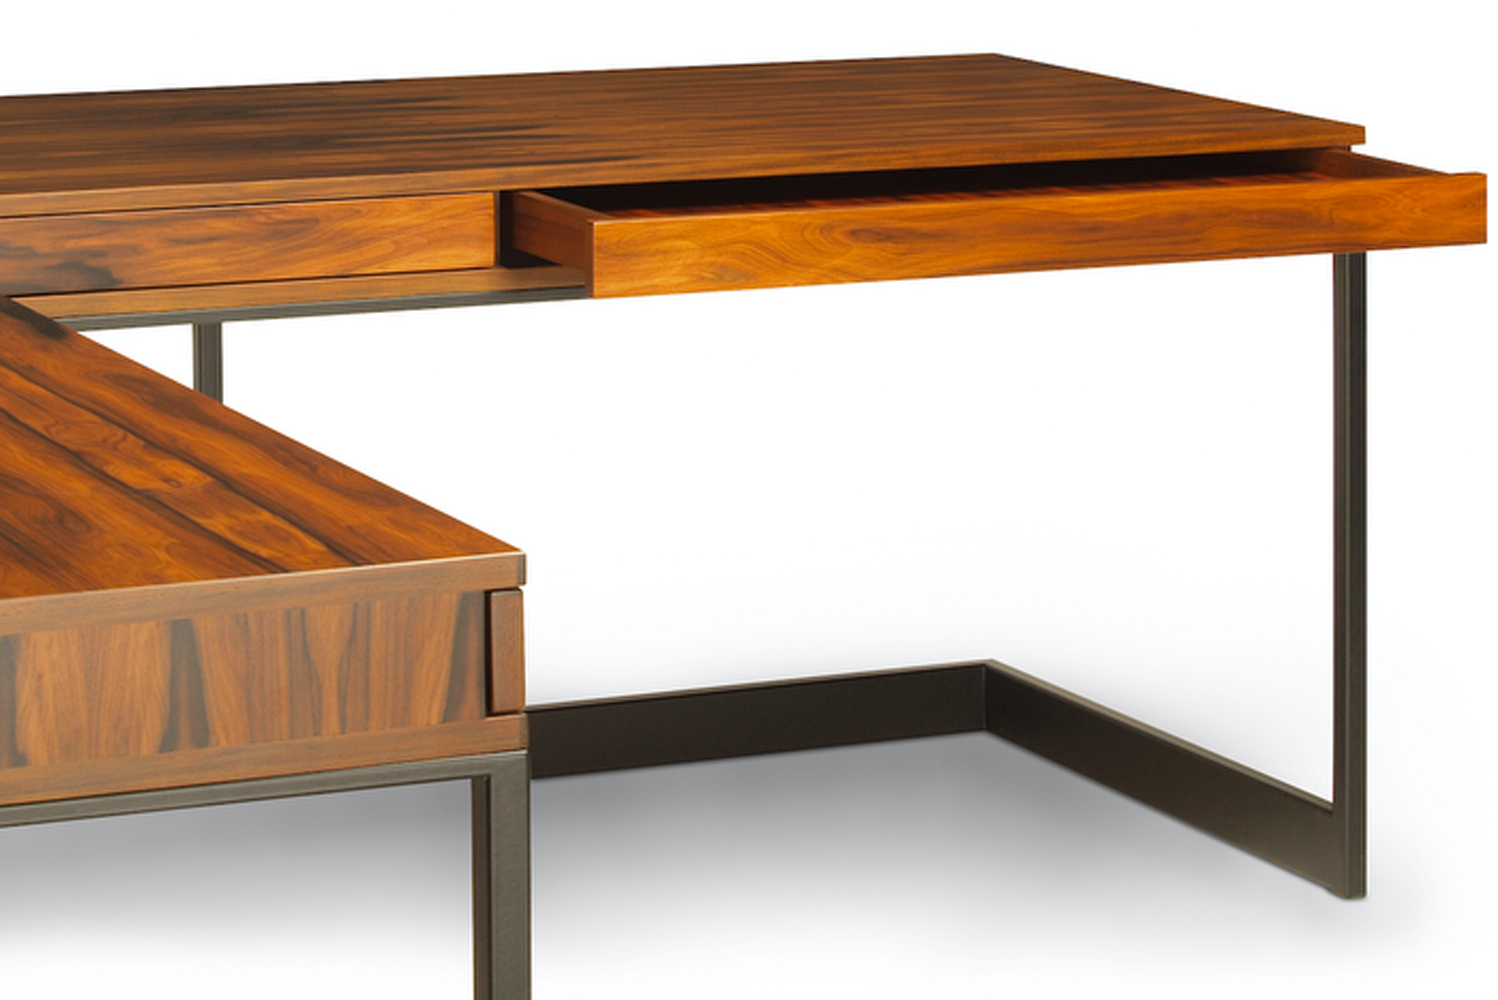 Skram Furniture launched a new addition to its Wishbone collection the Wishbone executive desk 